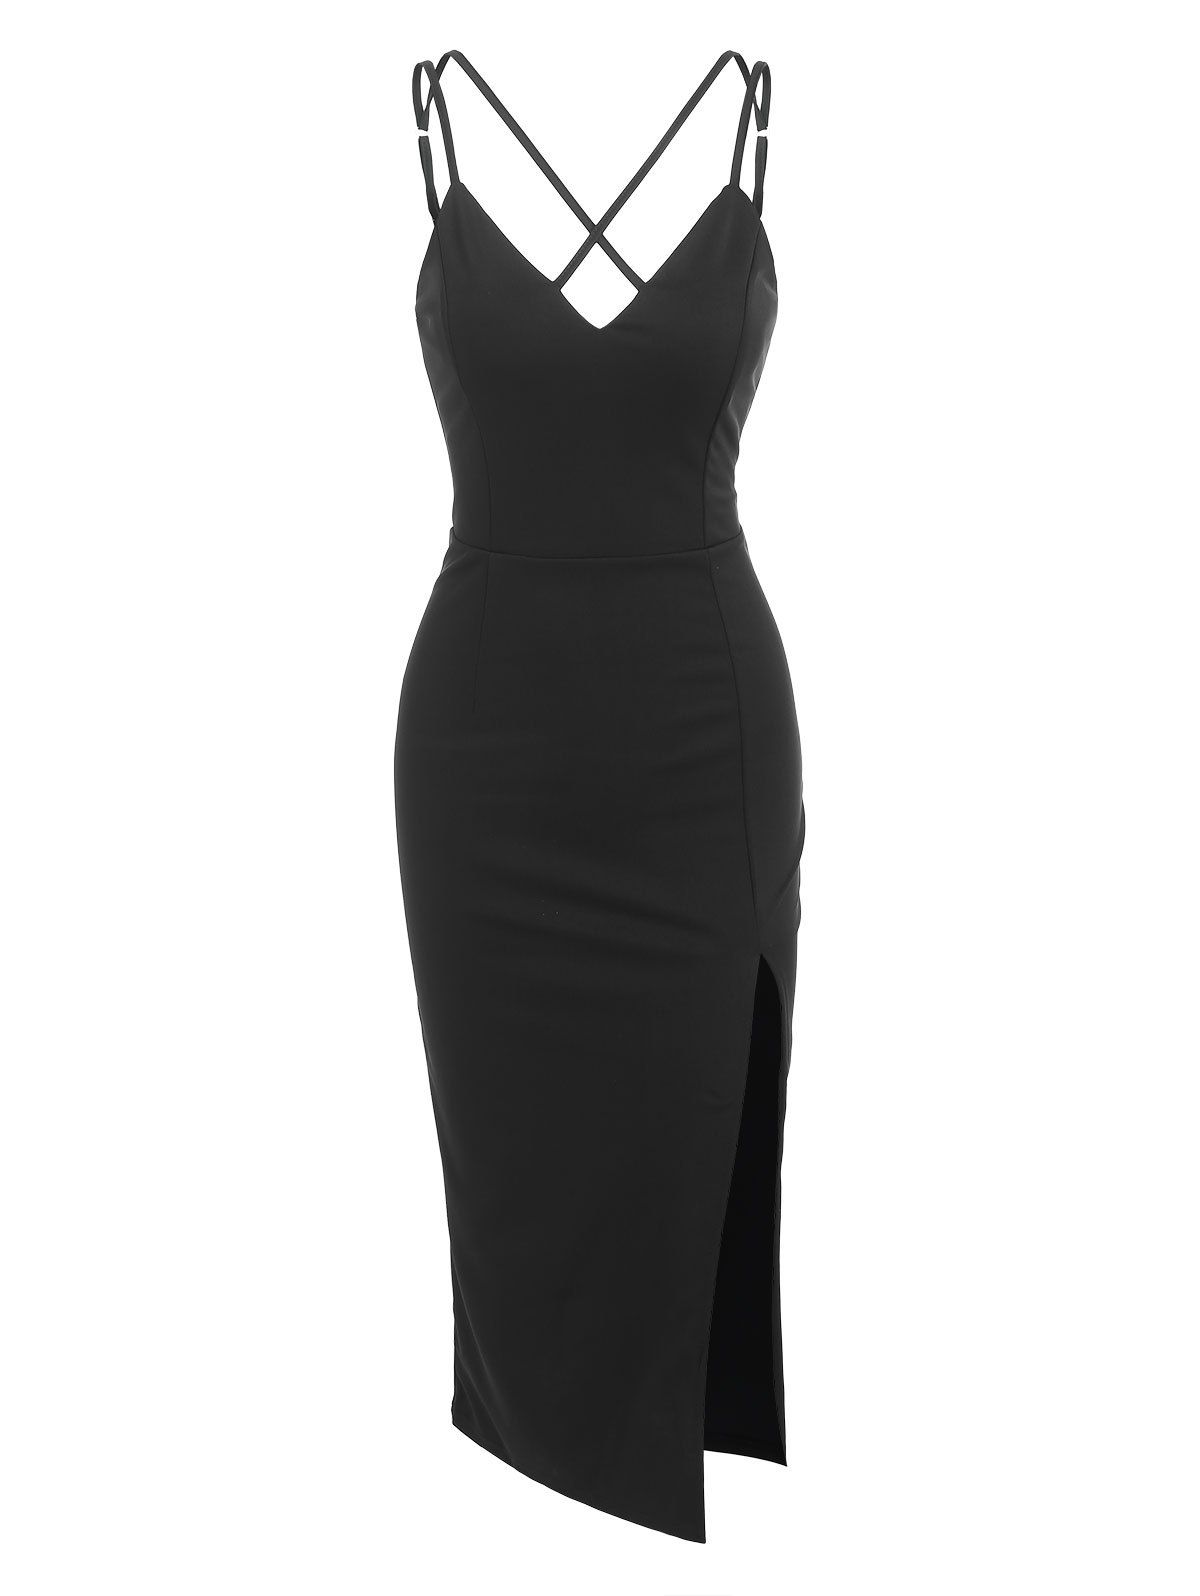 Strappy Crossover Corset Style High Slit Bodycon Party Dress - BLACK L